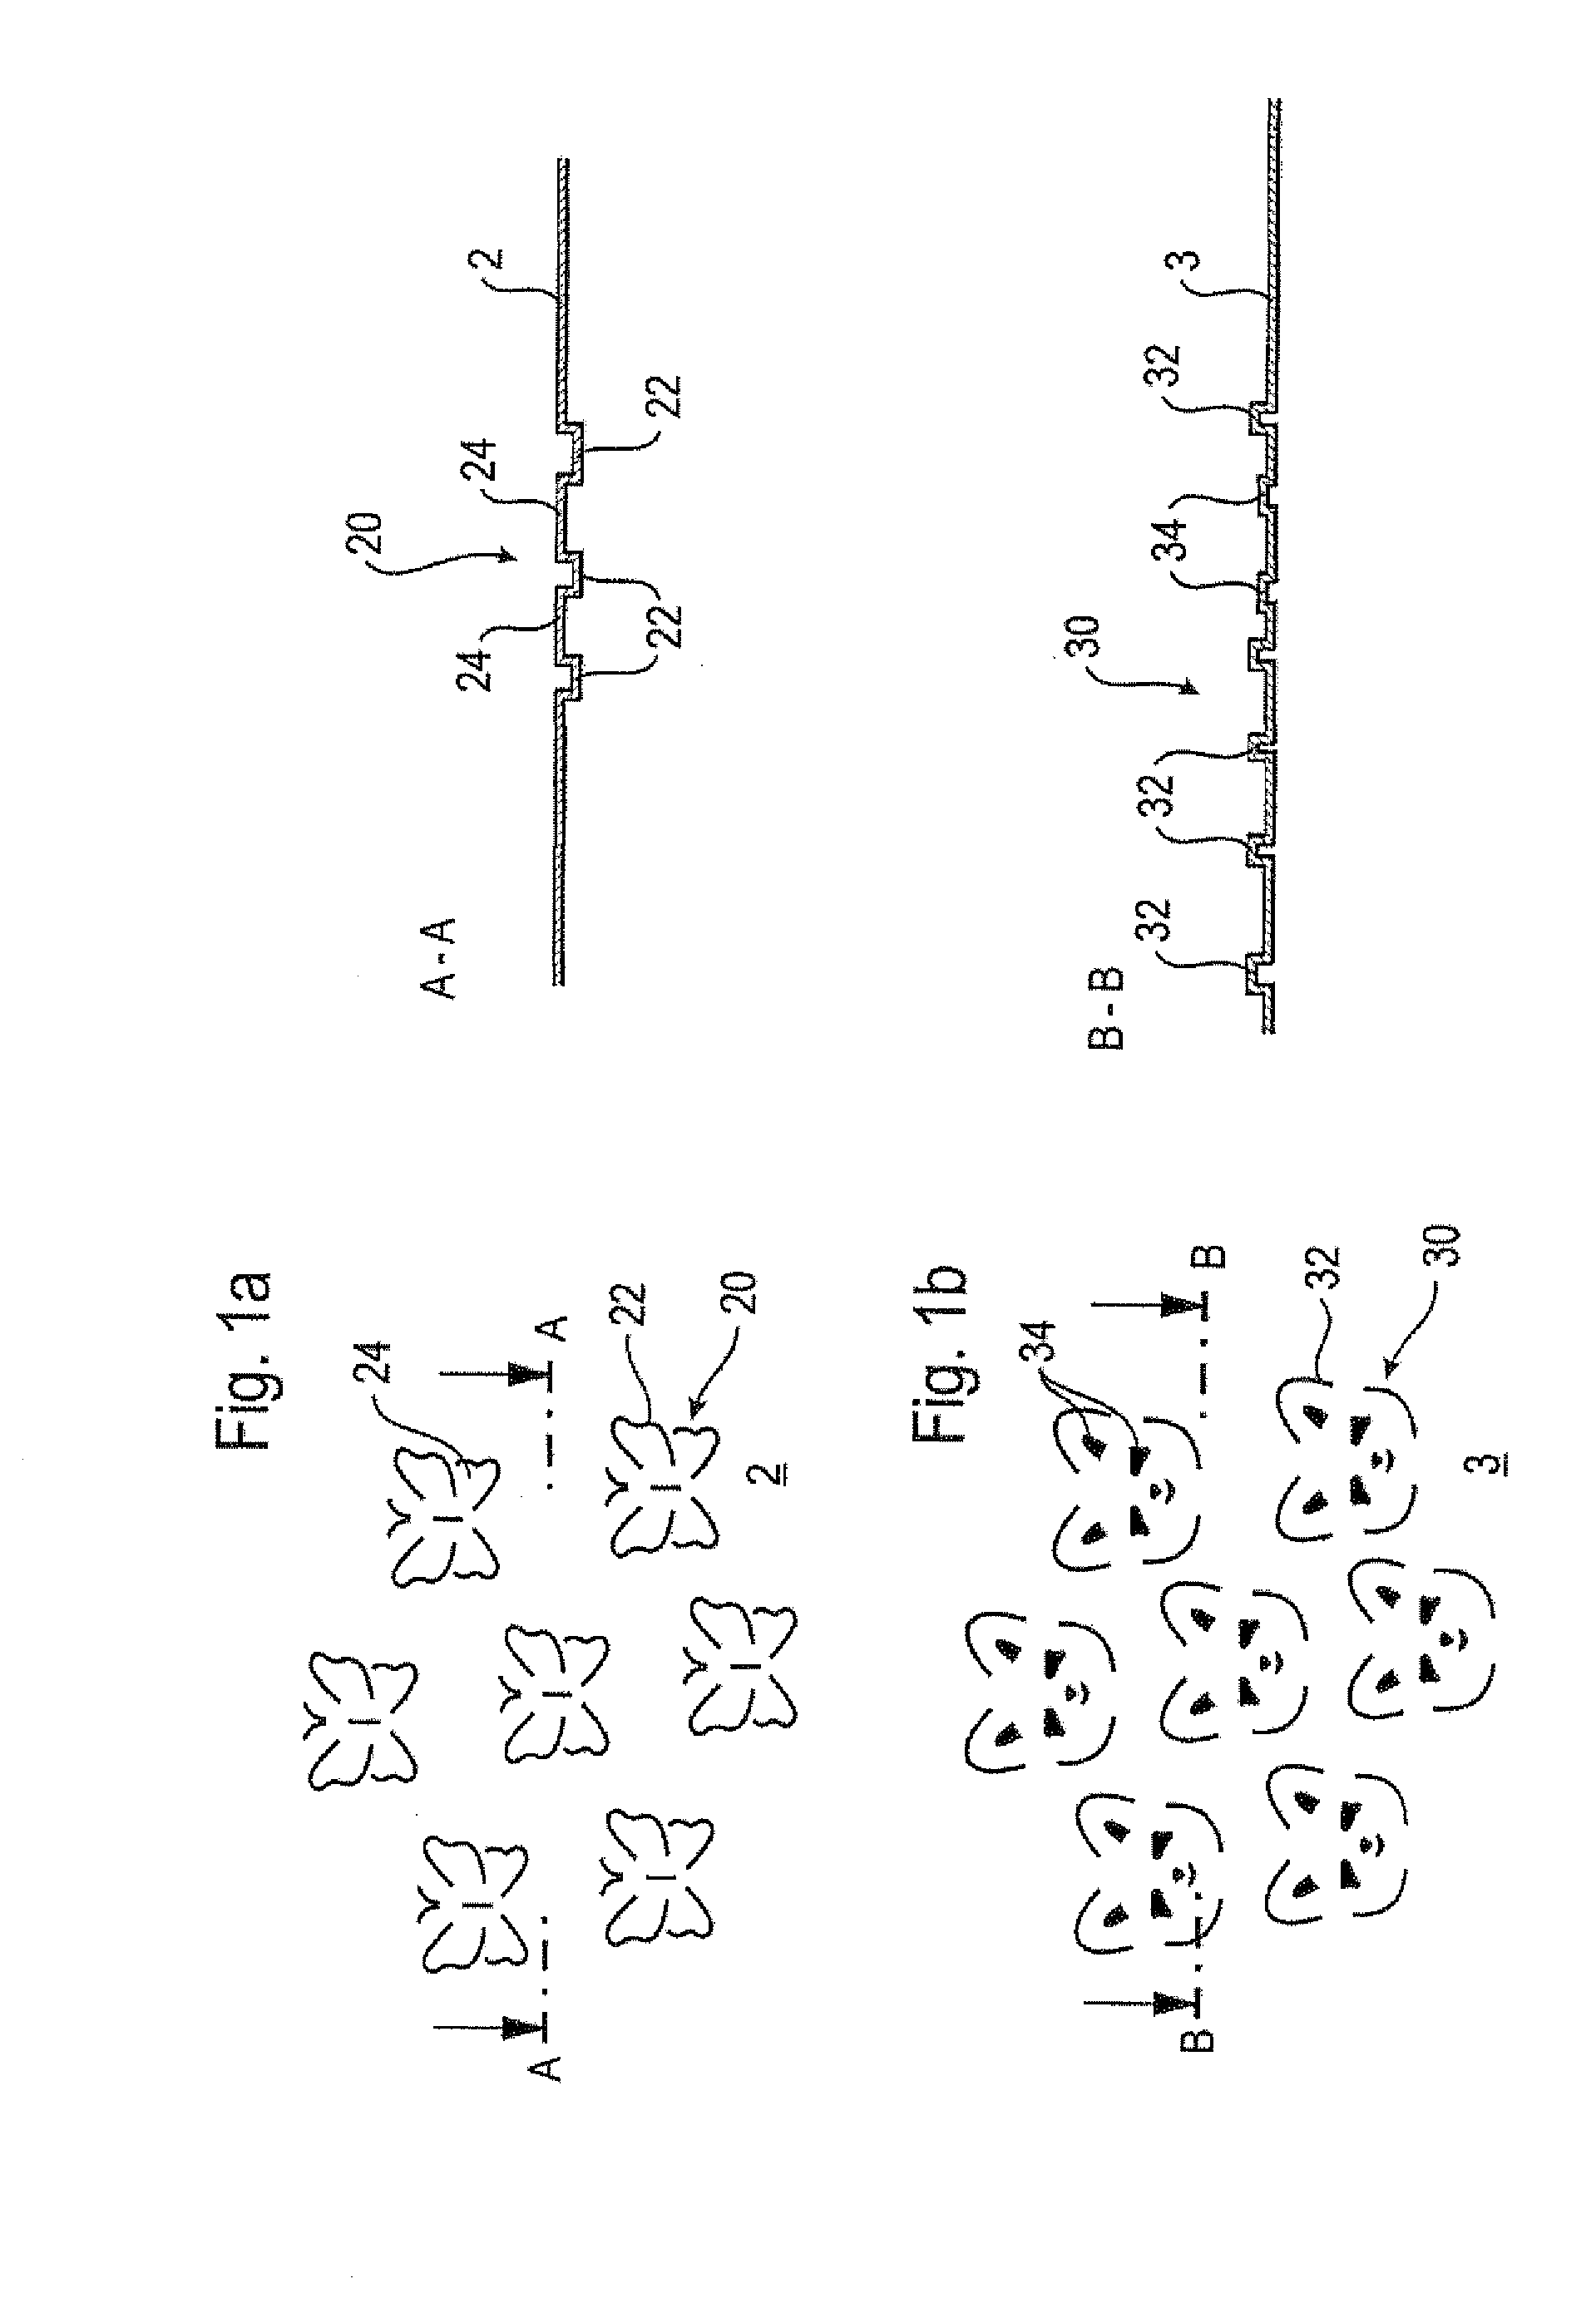 Multi-ply tissue paper product, paper converting device for a multi-ply tissue paper product and method for producing a multi-ply tissue paper product